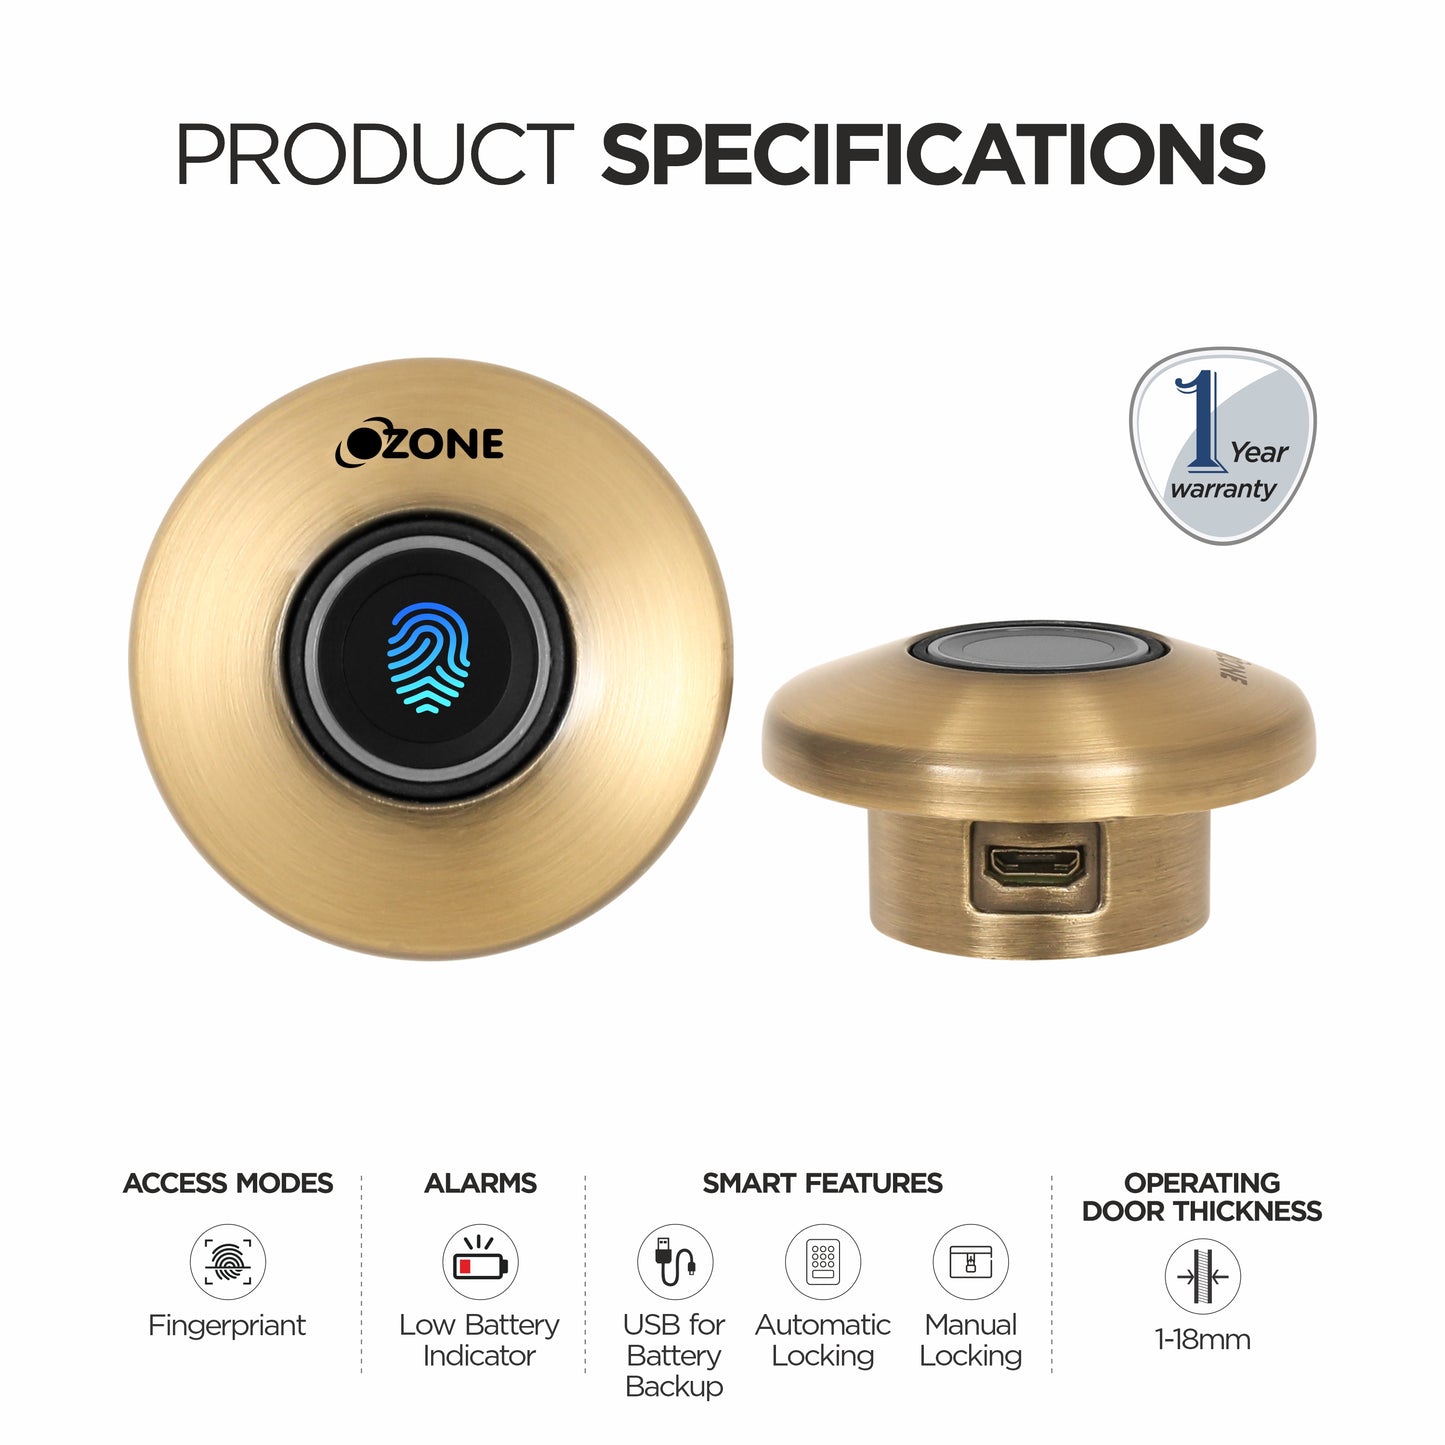 Ozone 55-F Smart Furniture Lock with Fingerprint Access for Wooden Cabinets, Wardrobes & Drawers